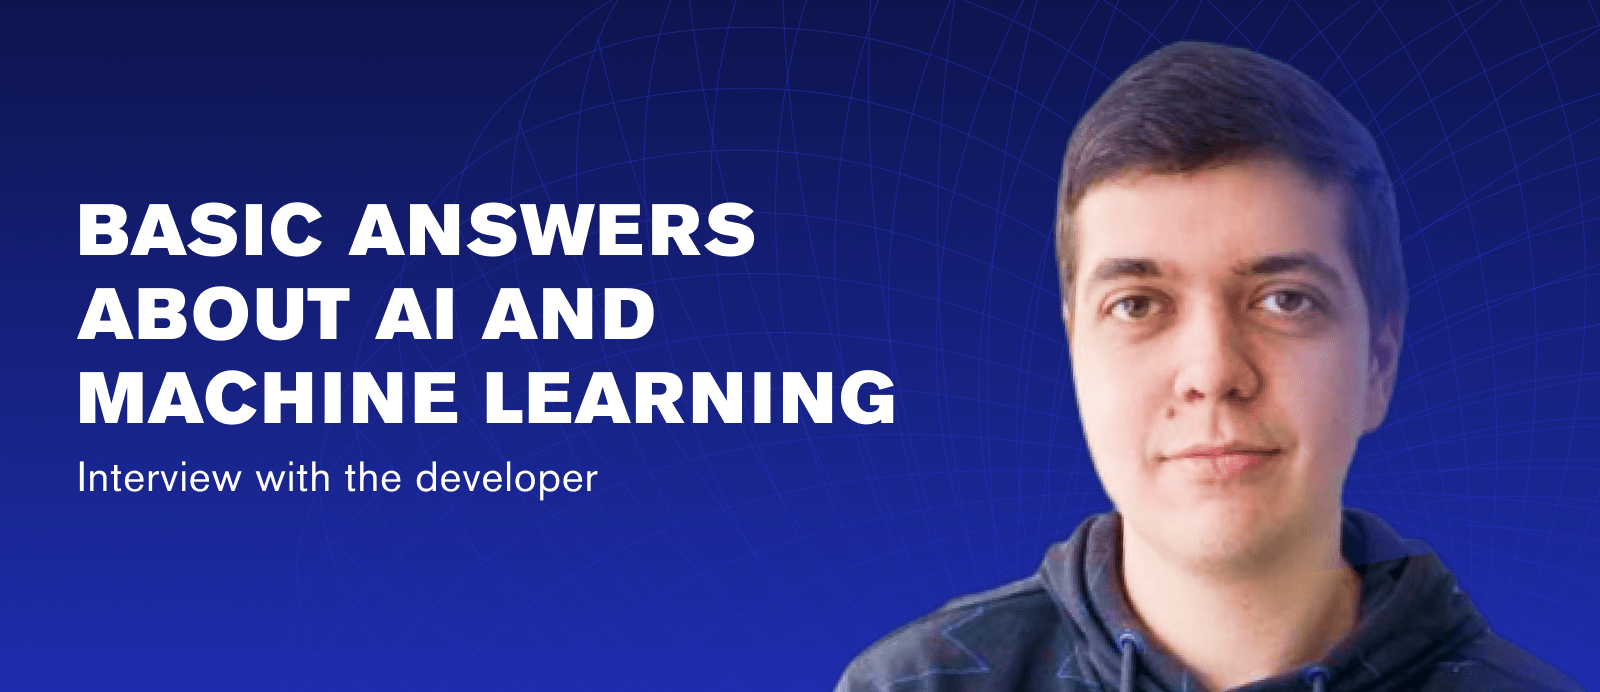 Basic answers about AI and ML. Interview with the developer